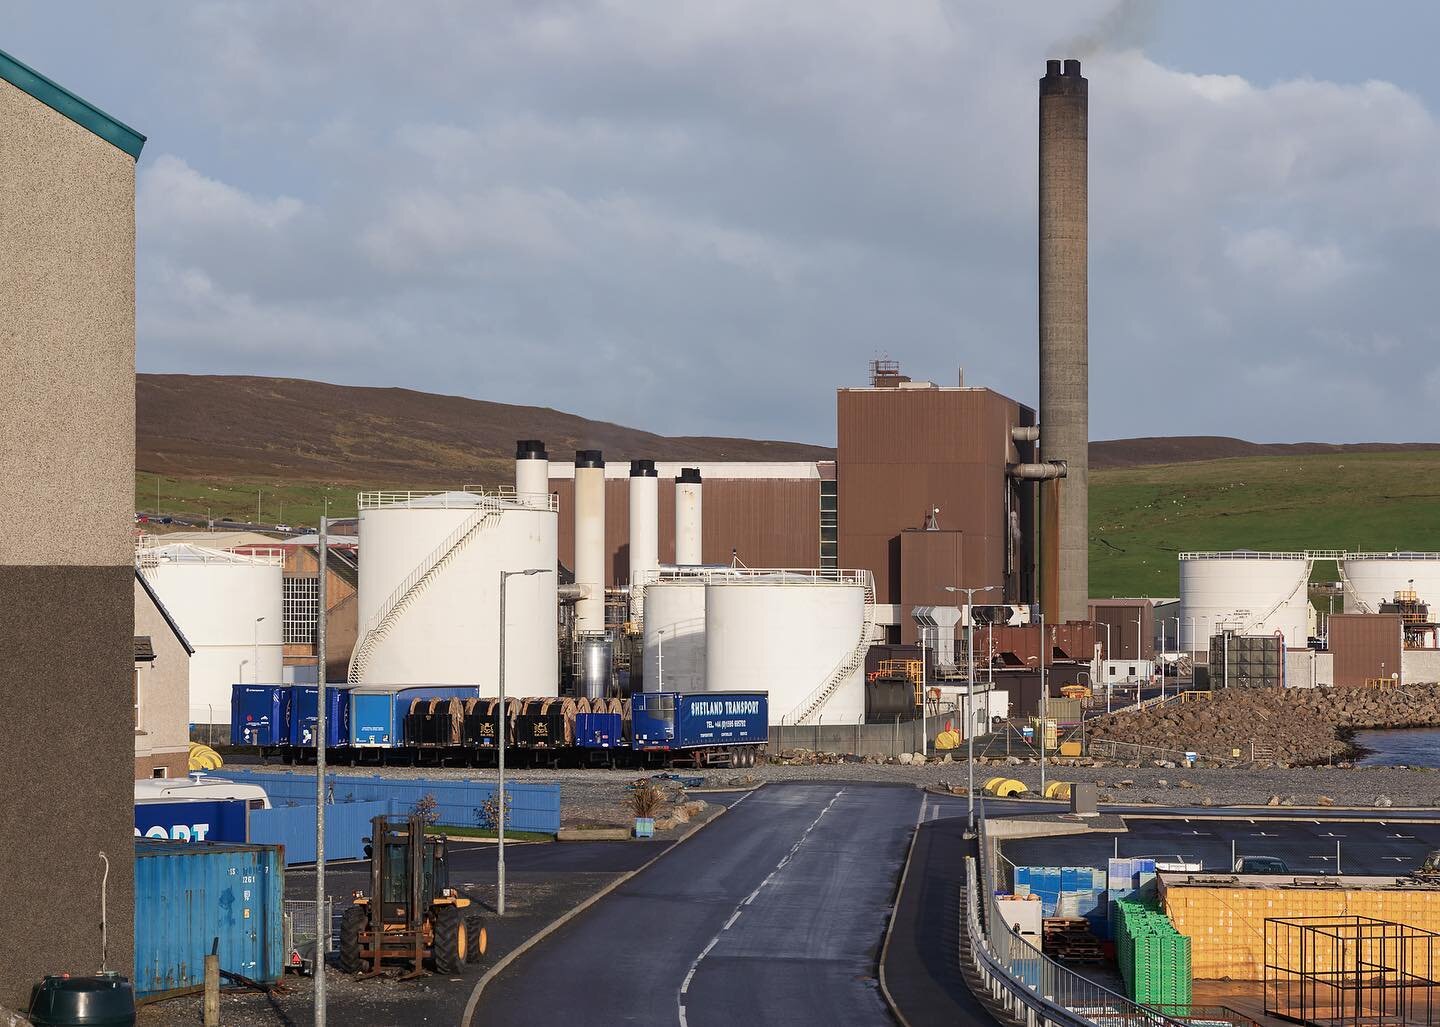 Lerwick Power Station, opened in 1953, is diesel-fuelled 73 MW power station which provides around 1/2 of electrical energy for Shetland, Scotland (2021).

Power station is approaching end of its scheduled operational life.

#shetland #lerwick #gremi